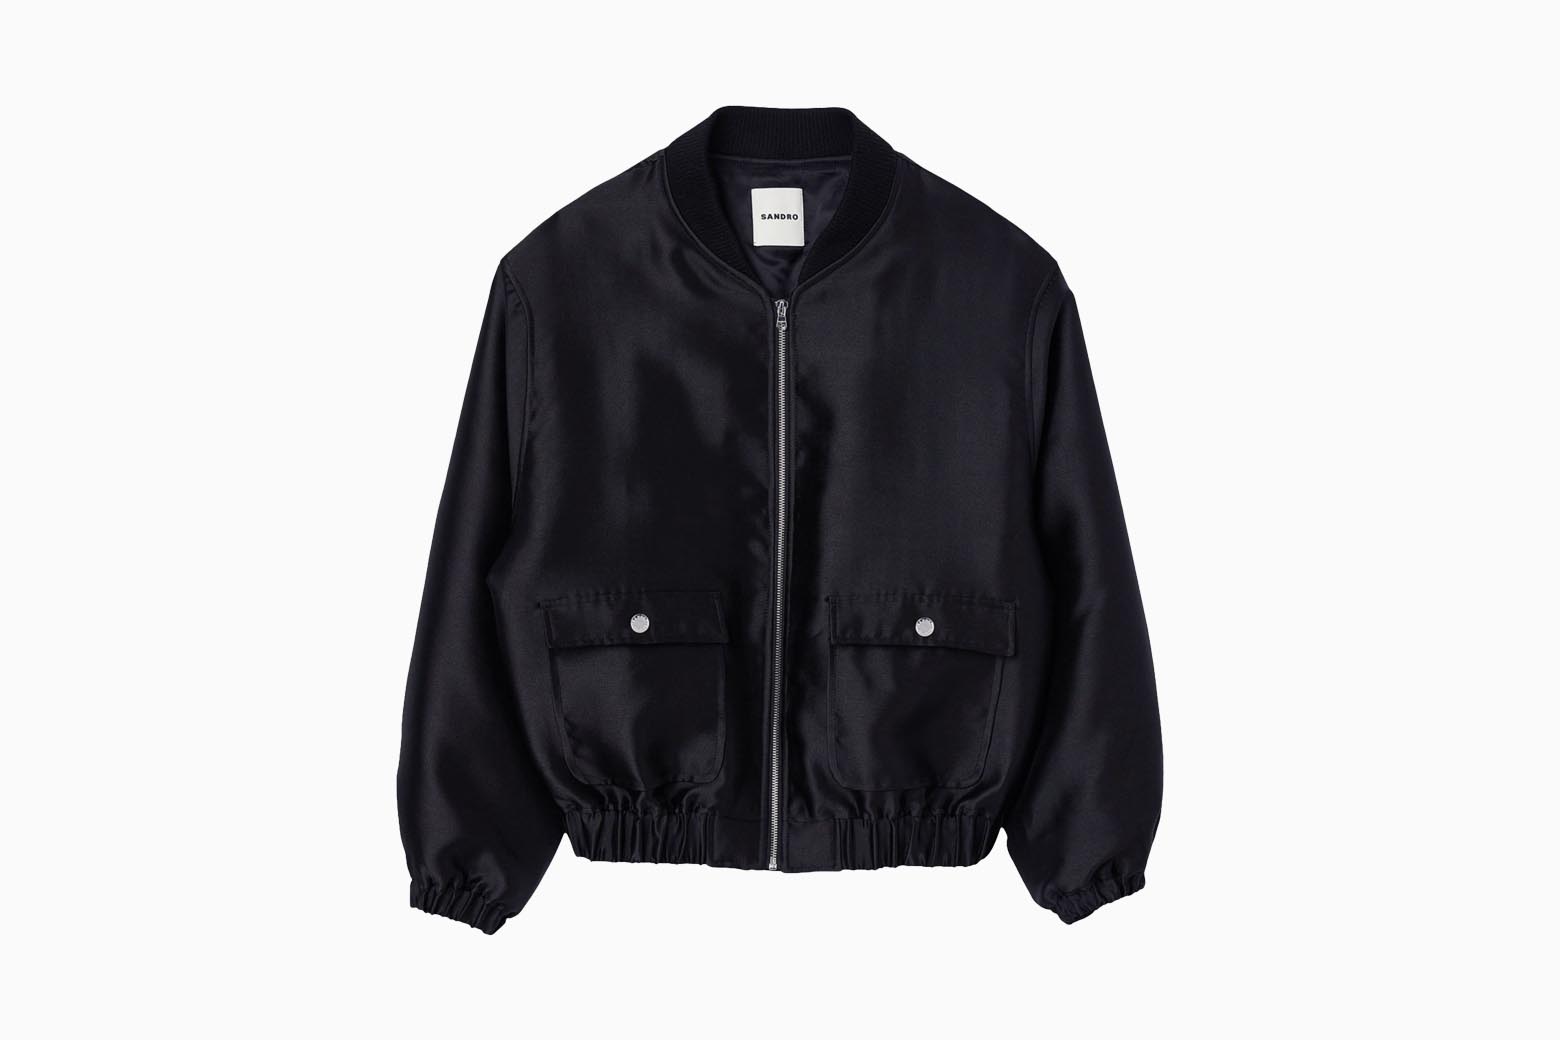 11 Best Bomber Jackets To Add To Your Everyday Arsenal